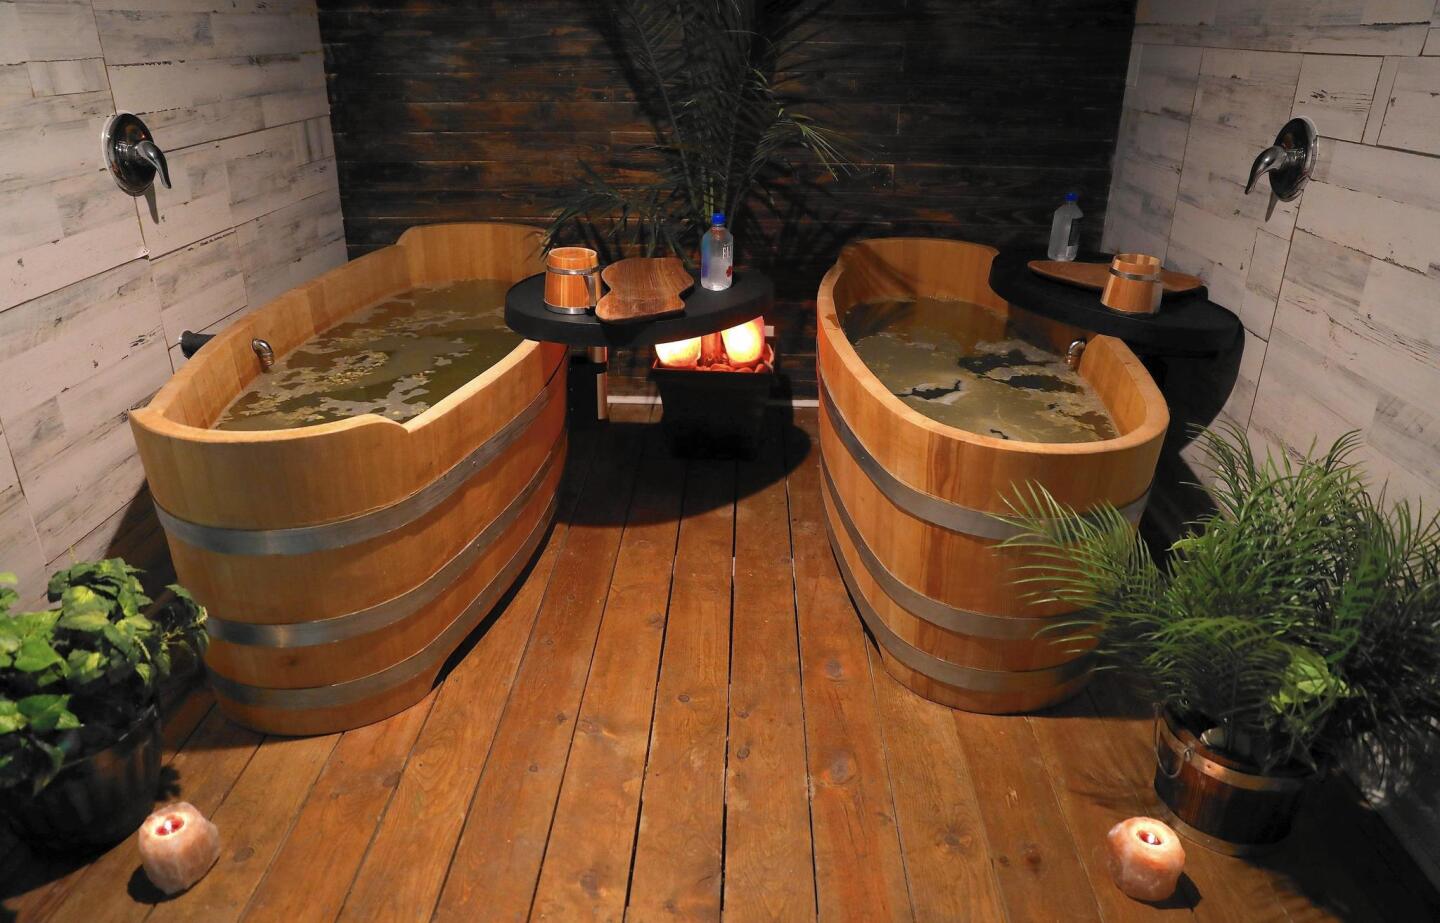 Patrons soak in a larch wood tubs filled with hops, yeast, herbs and beer at Piva Beer Spa.